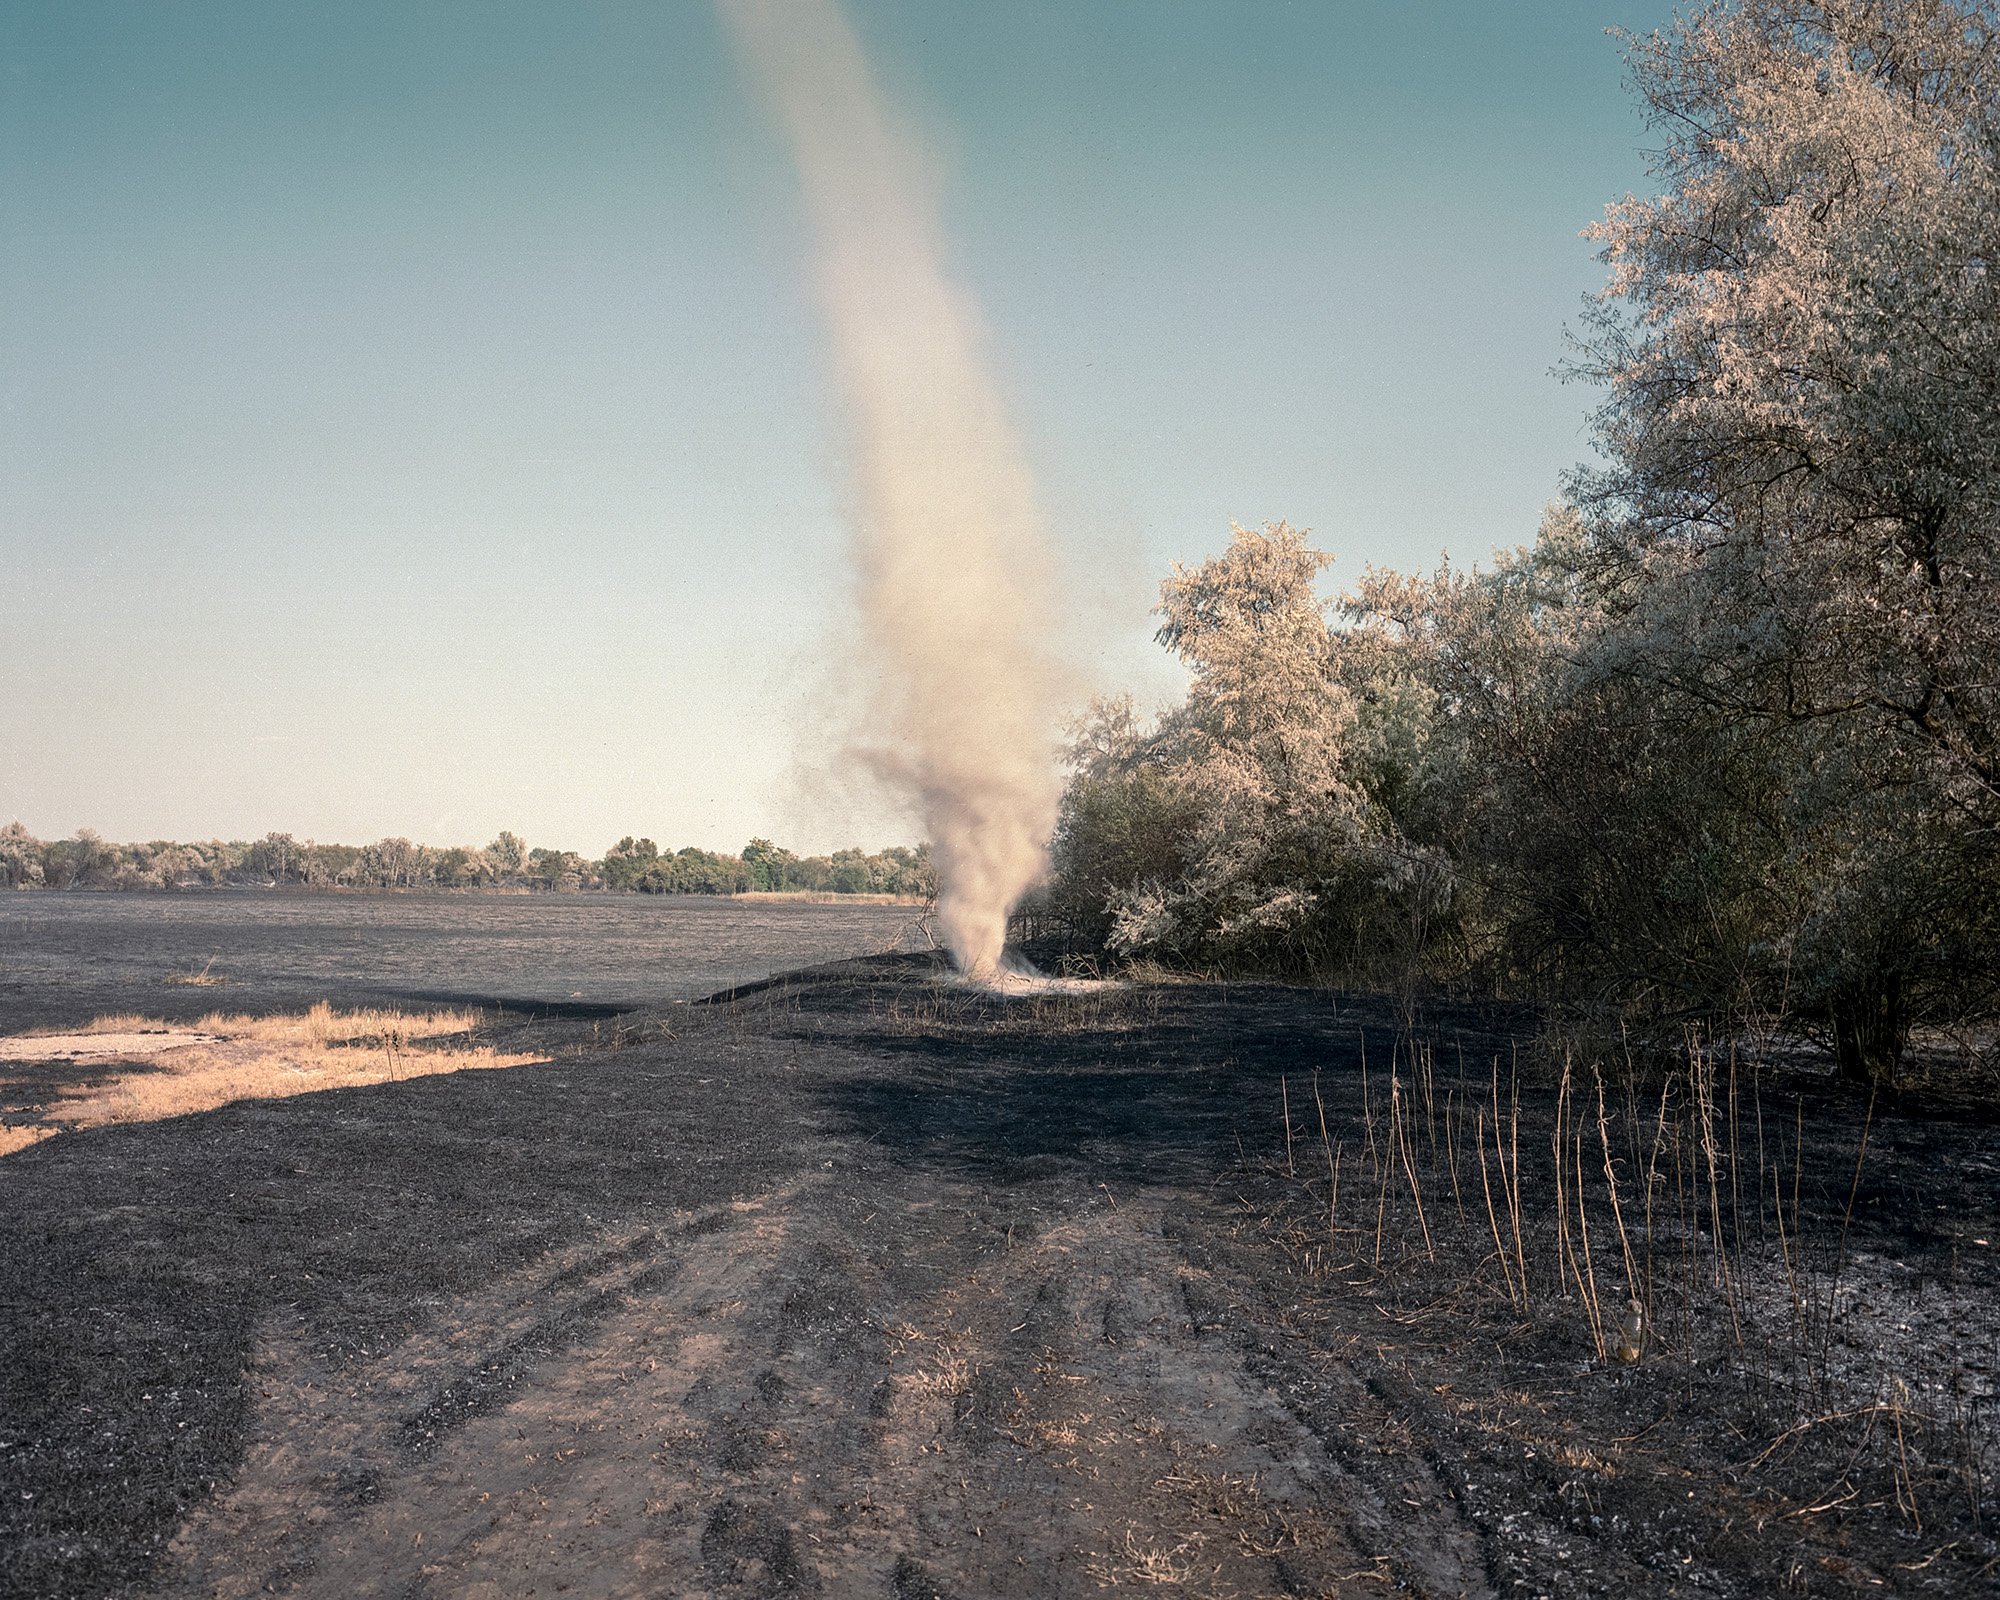  Aftermath of a reed fire  Szeged, Hungary, 2022 